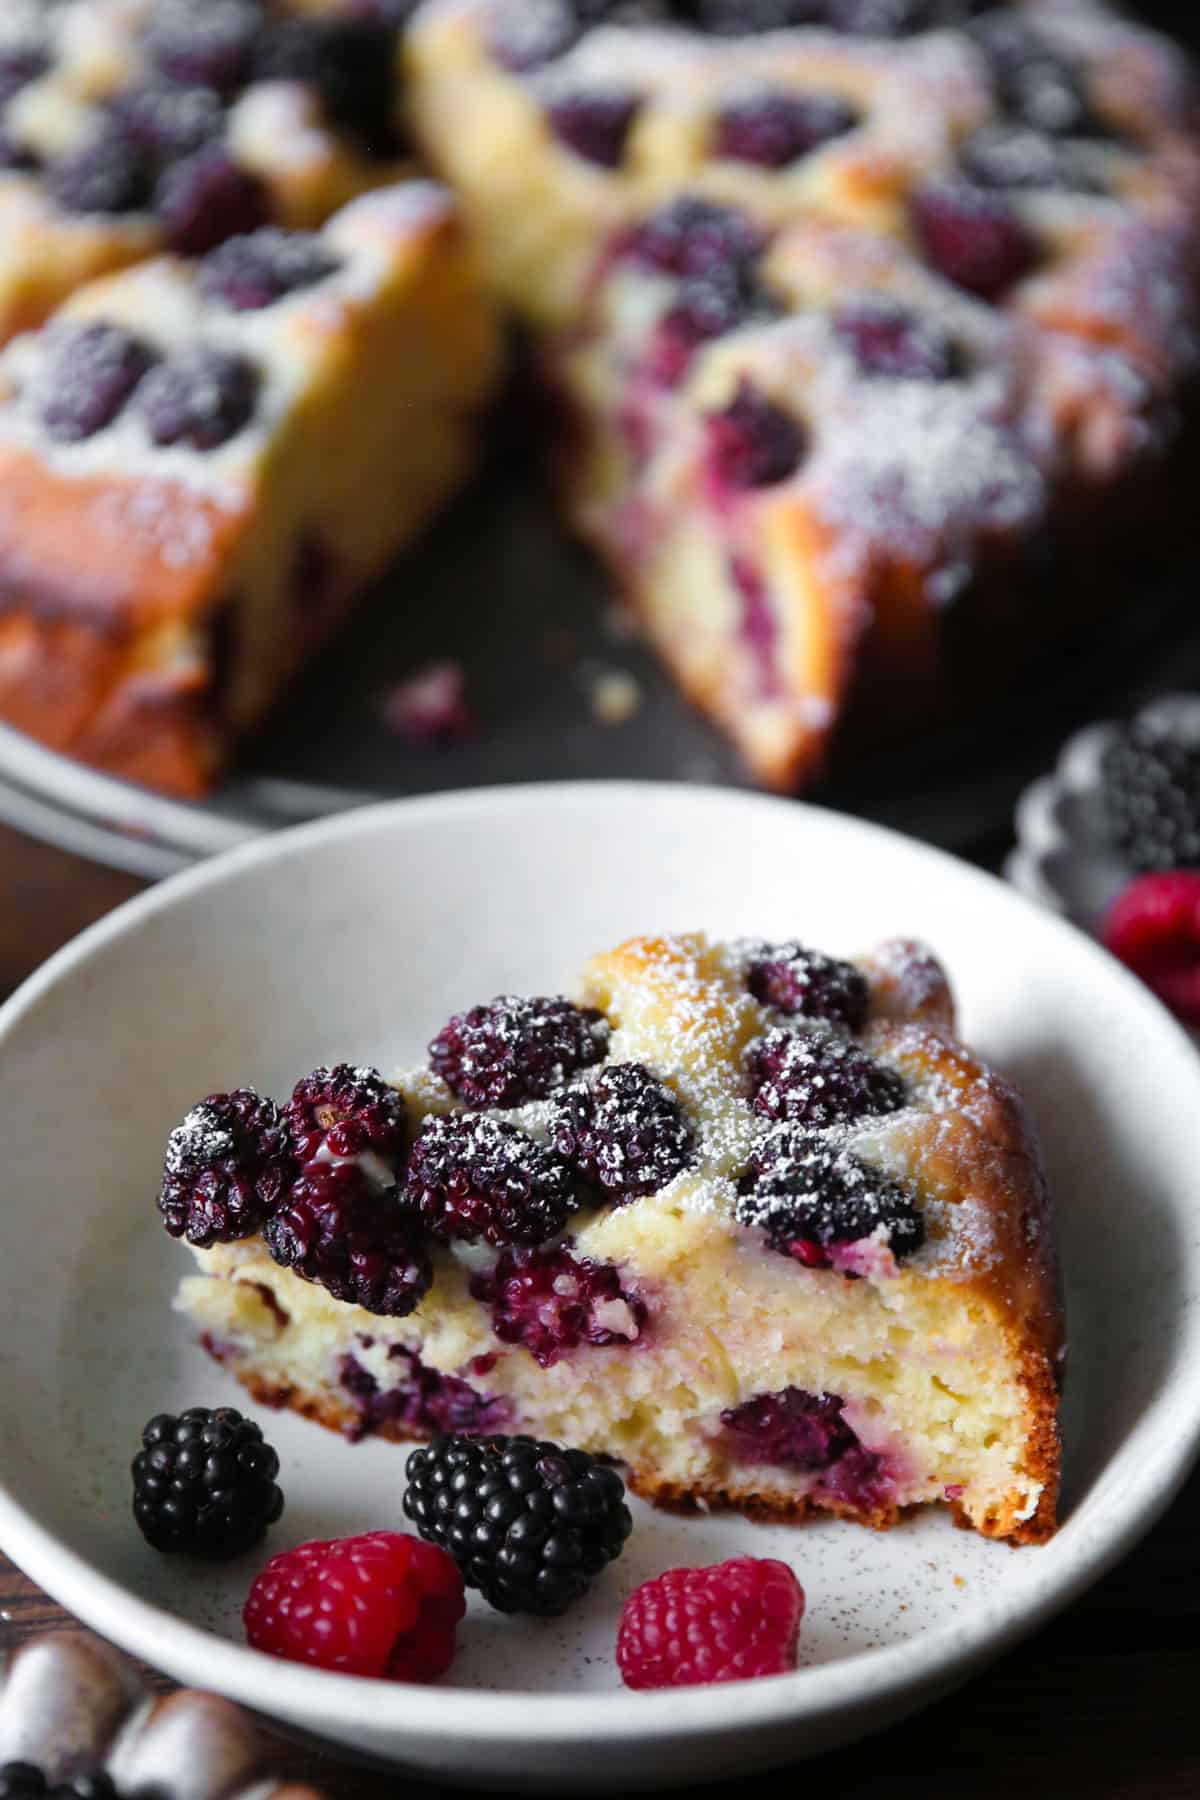 a slice of blackberry cake on a plate, with the remaining cake on a platter in a background.